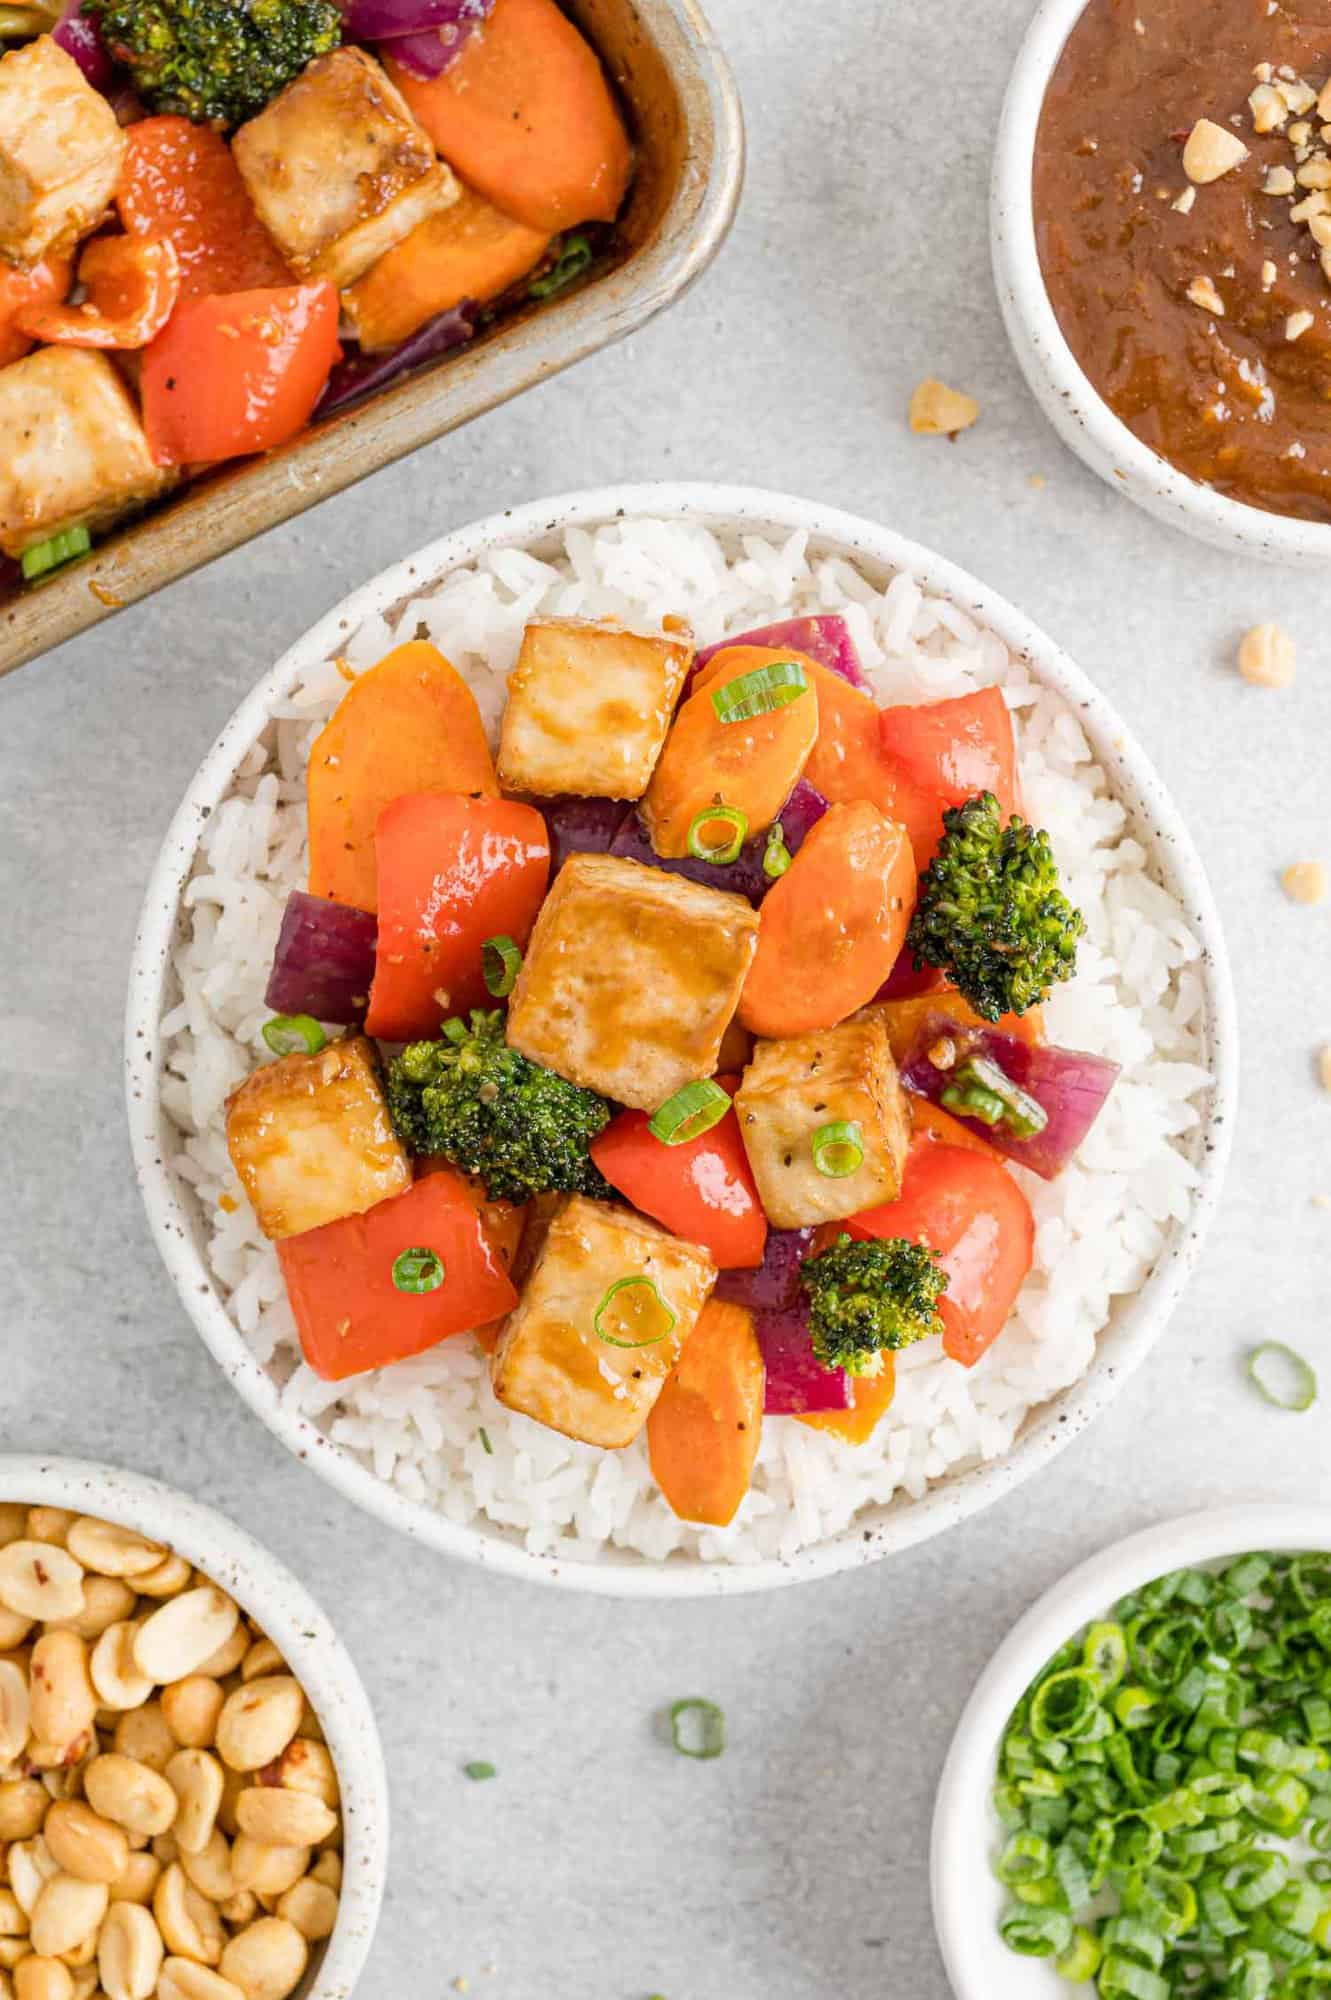 Tofu stir fry served with rice in a bowl.